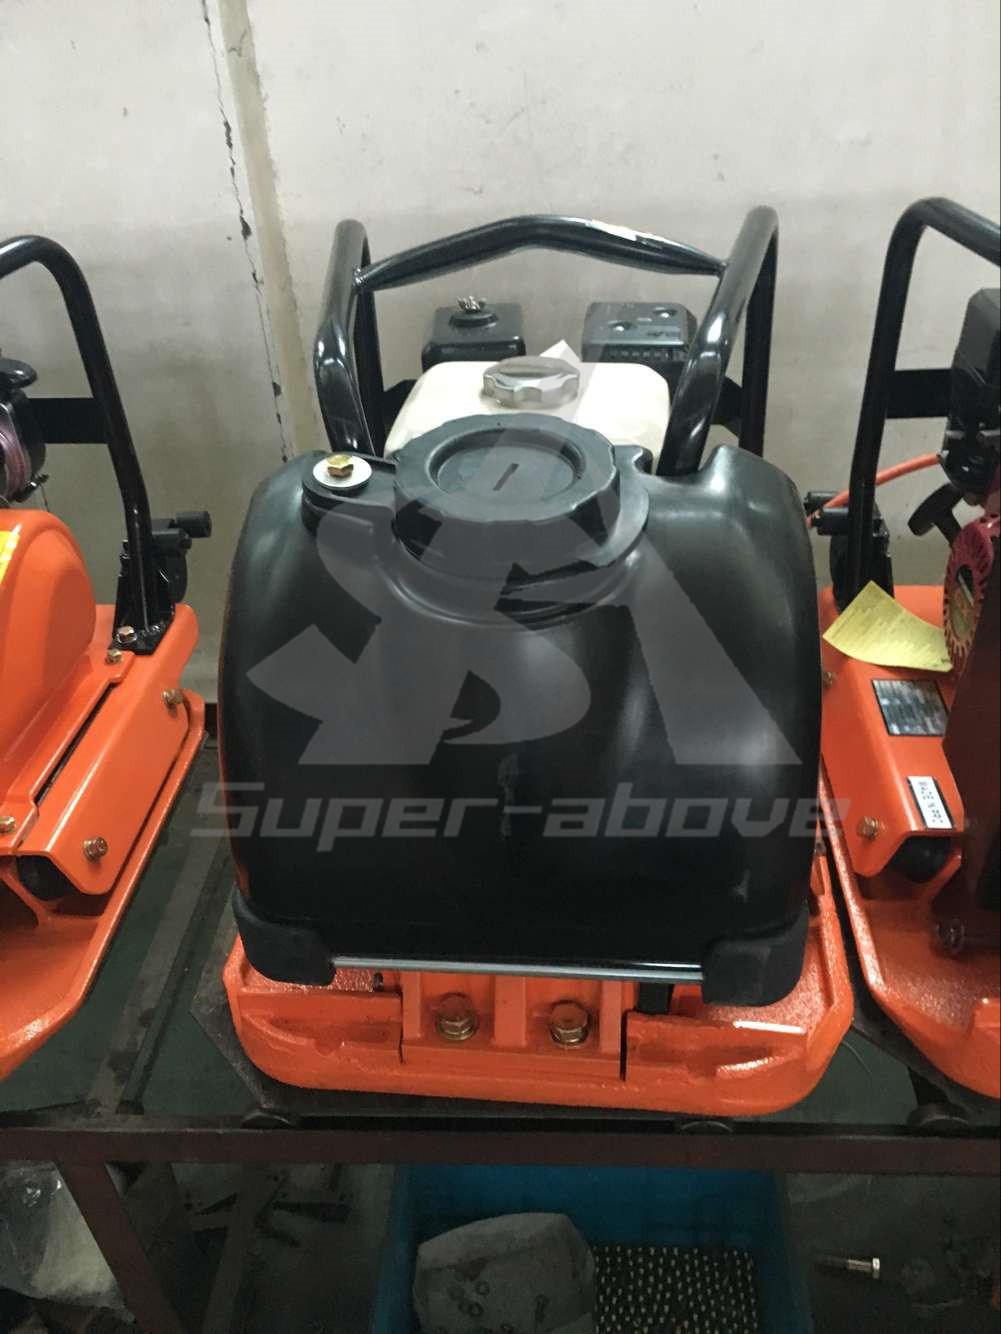 China Manufacture Plate Compactor with High Quality